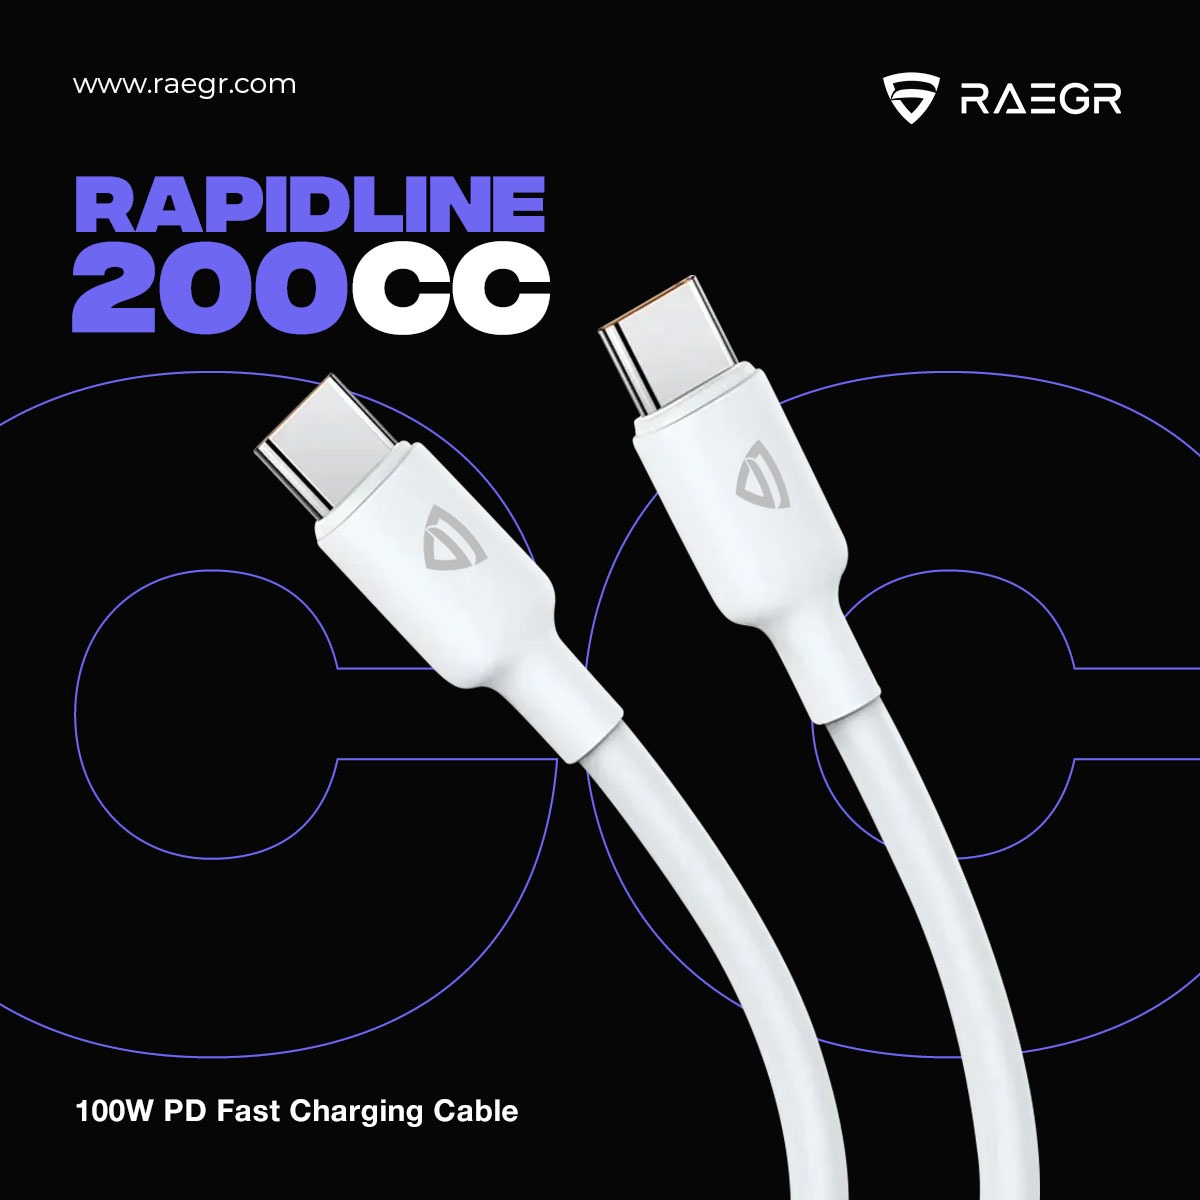 Tangle-free, strong, and resistant to external damage, the REAGR RapidLine 200CC USB Type C-C Cable is everything you’d ever want in a cable. 

Buy Now!
Raegr:postly.app/3SKu
Tekkitake:postly.app/3SKv
Amazon:postly.app/3SKw

#RAEGR #RapidLine #FastCharge